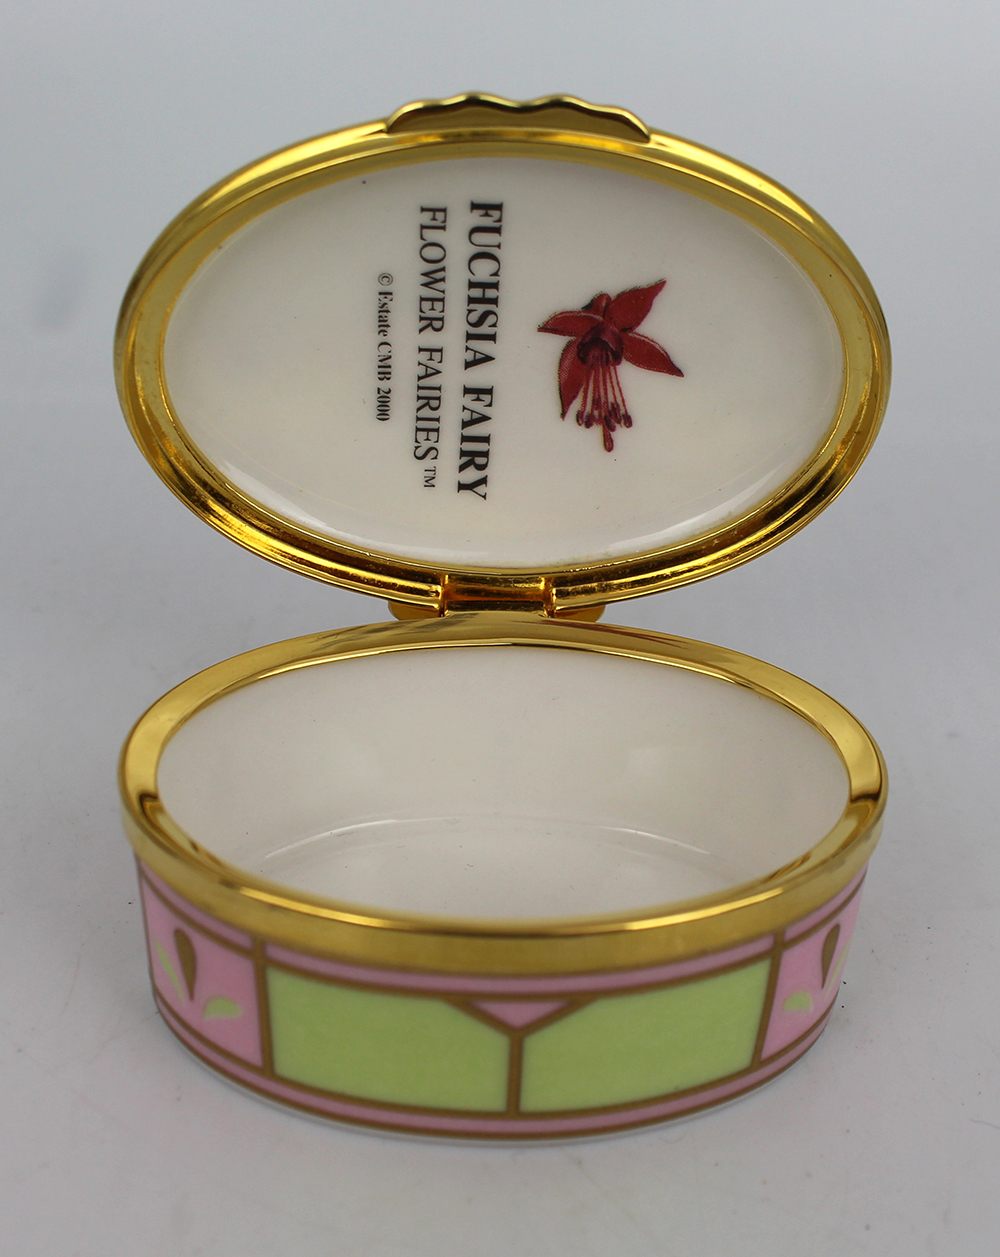 Royal Worcester The Connoisseur Collection Fuchsia Fairy Trinket Box - Image 3 of 4